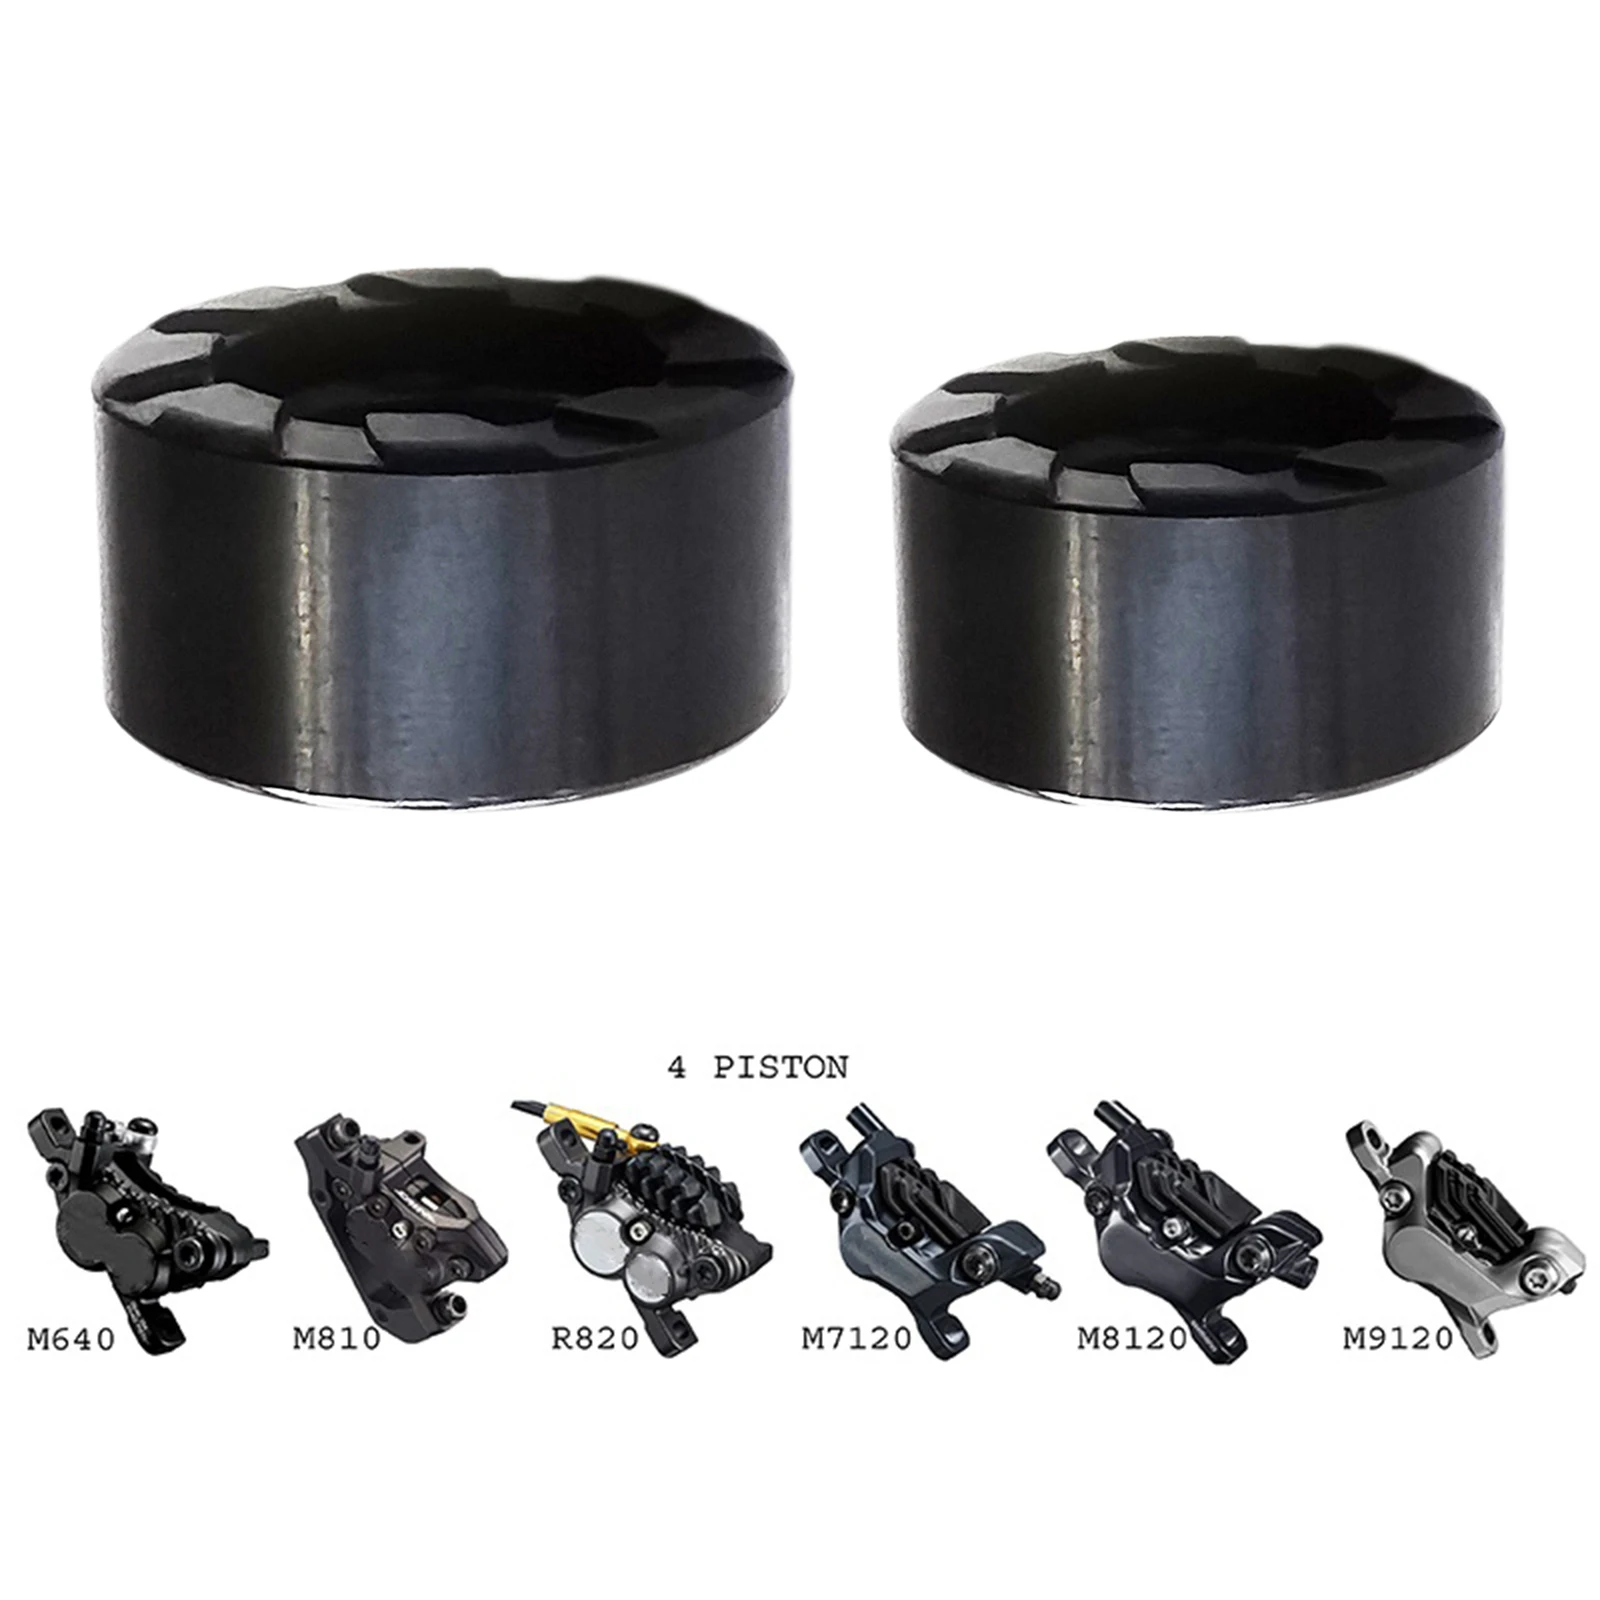 Brake Caliper Piston Replacement Road MTB Bicycle Hydraulic Disc Brake Parts Accessories Fits for Shimano 17.2/15.1mm Pistons